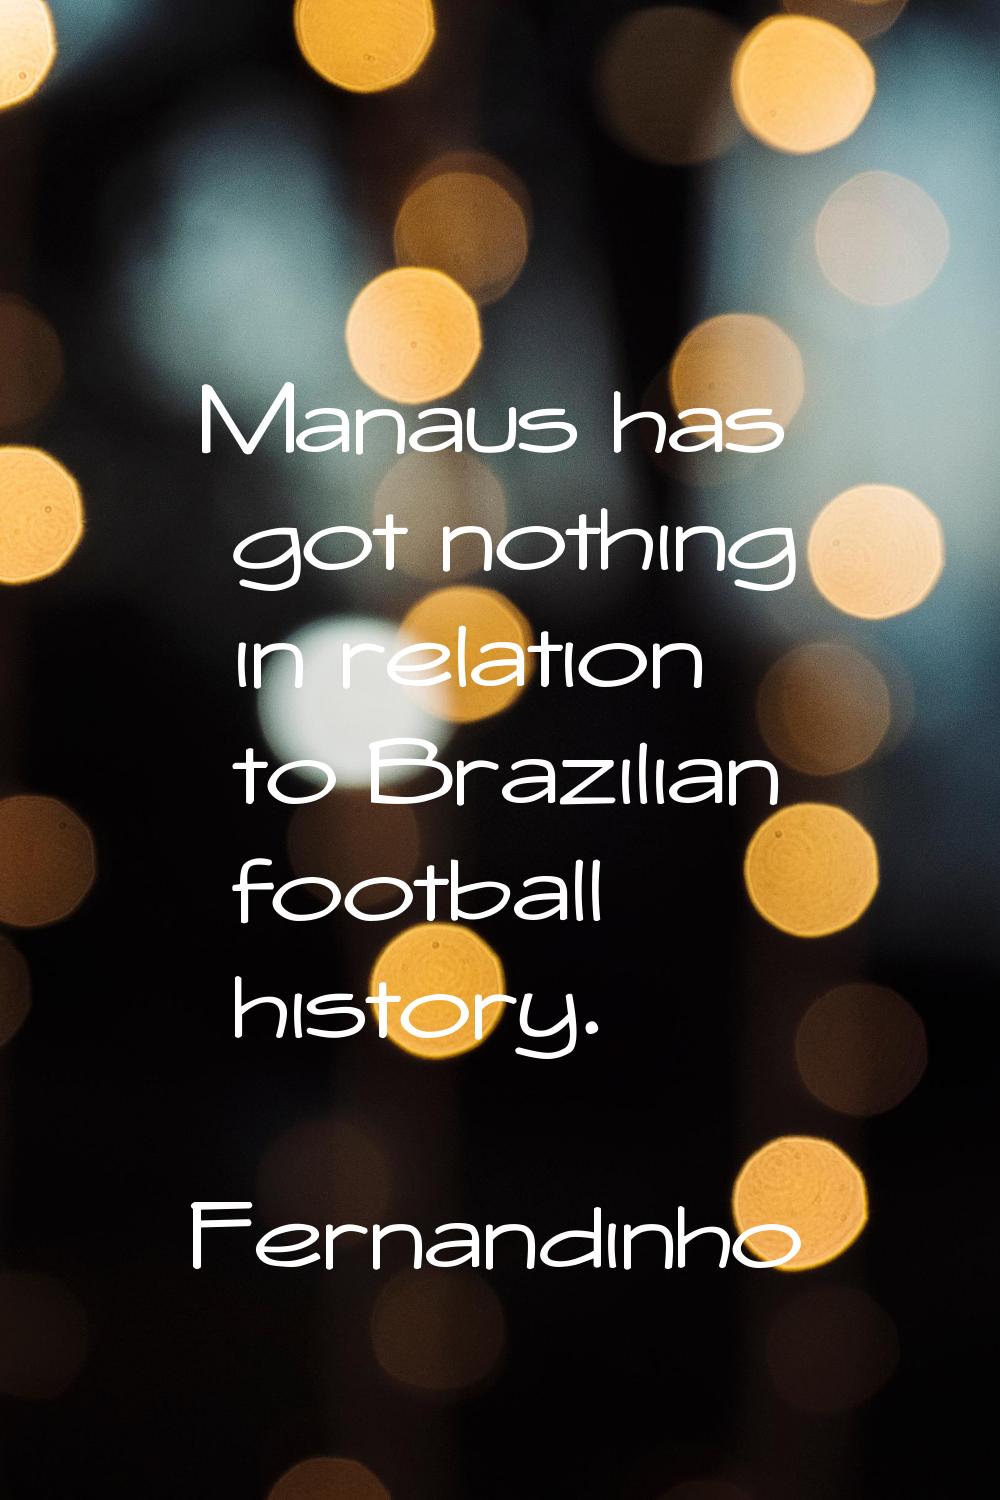 Manaus has got nothing in relation to Brazilian football history.